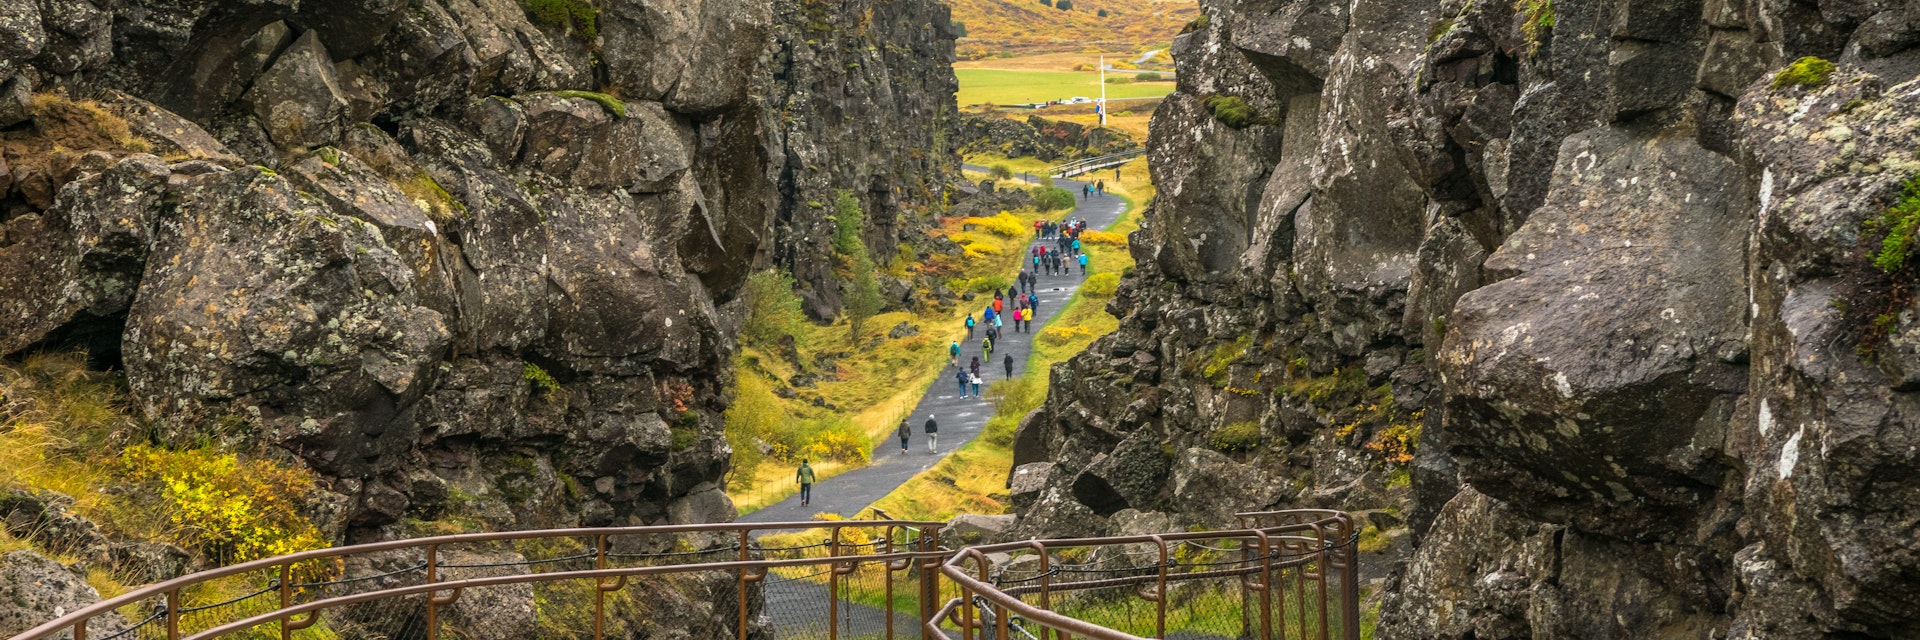 Iceland - Thingvellir National Park, October, 10, 2014 - Beautiful view of people walking in the seam between the Eurasian and North American tectonic plates.